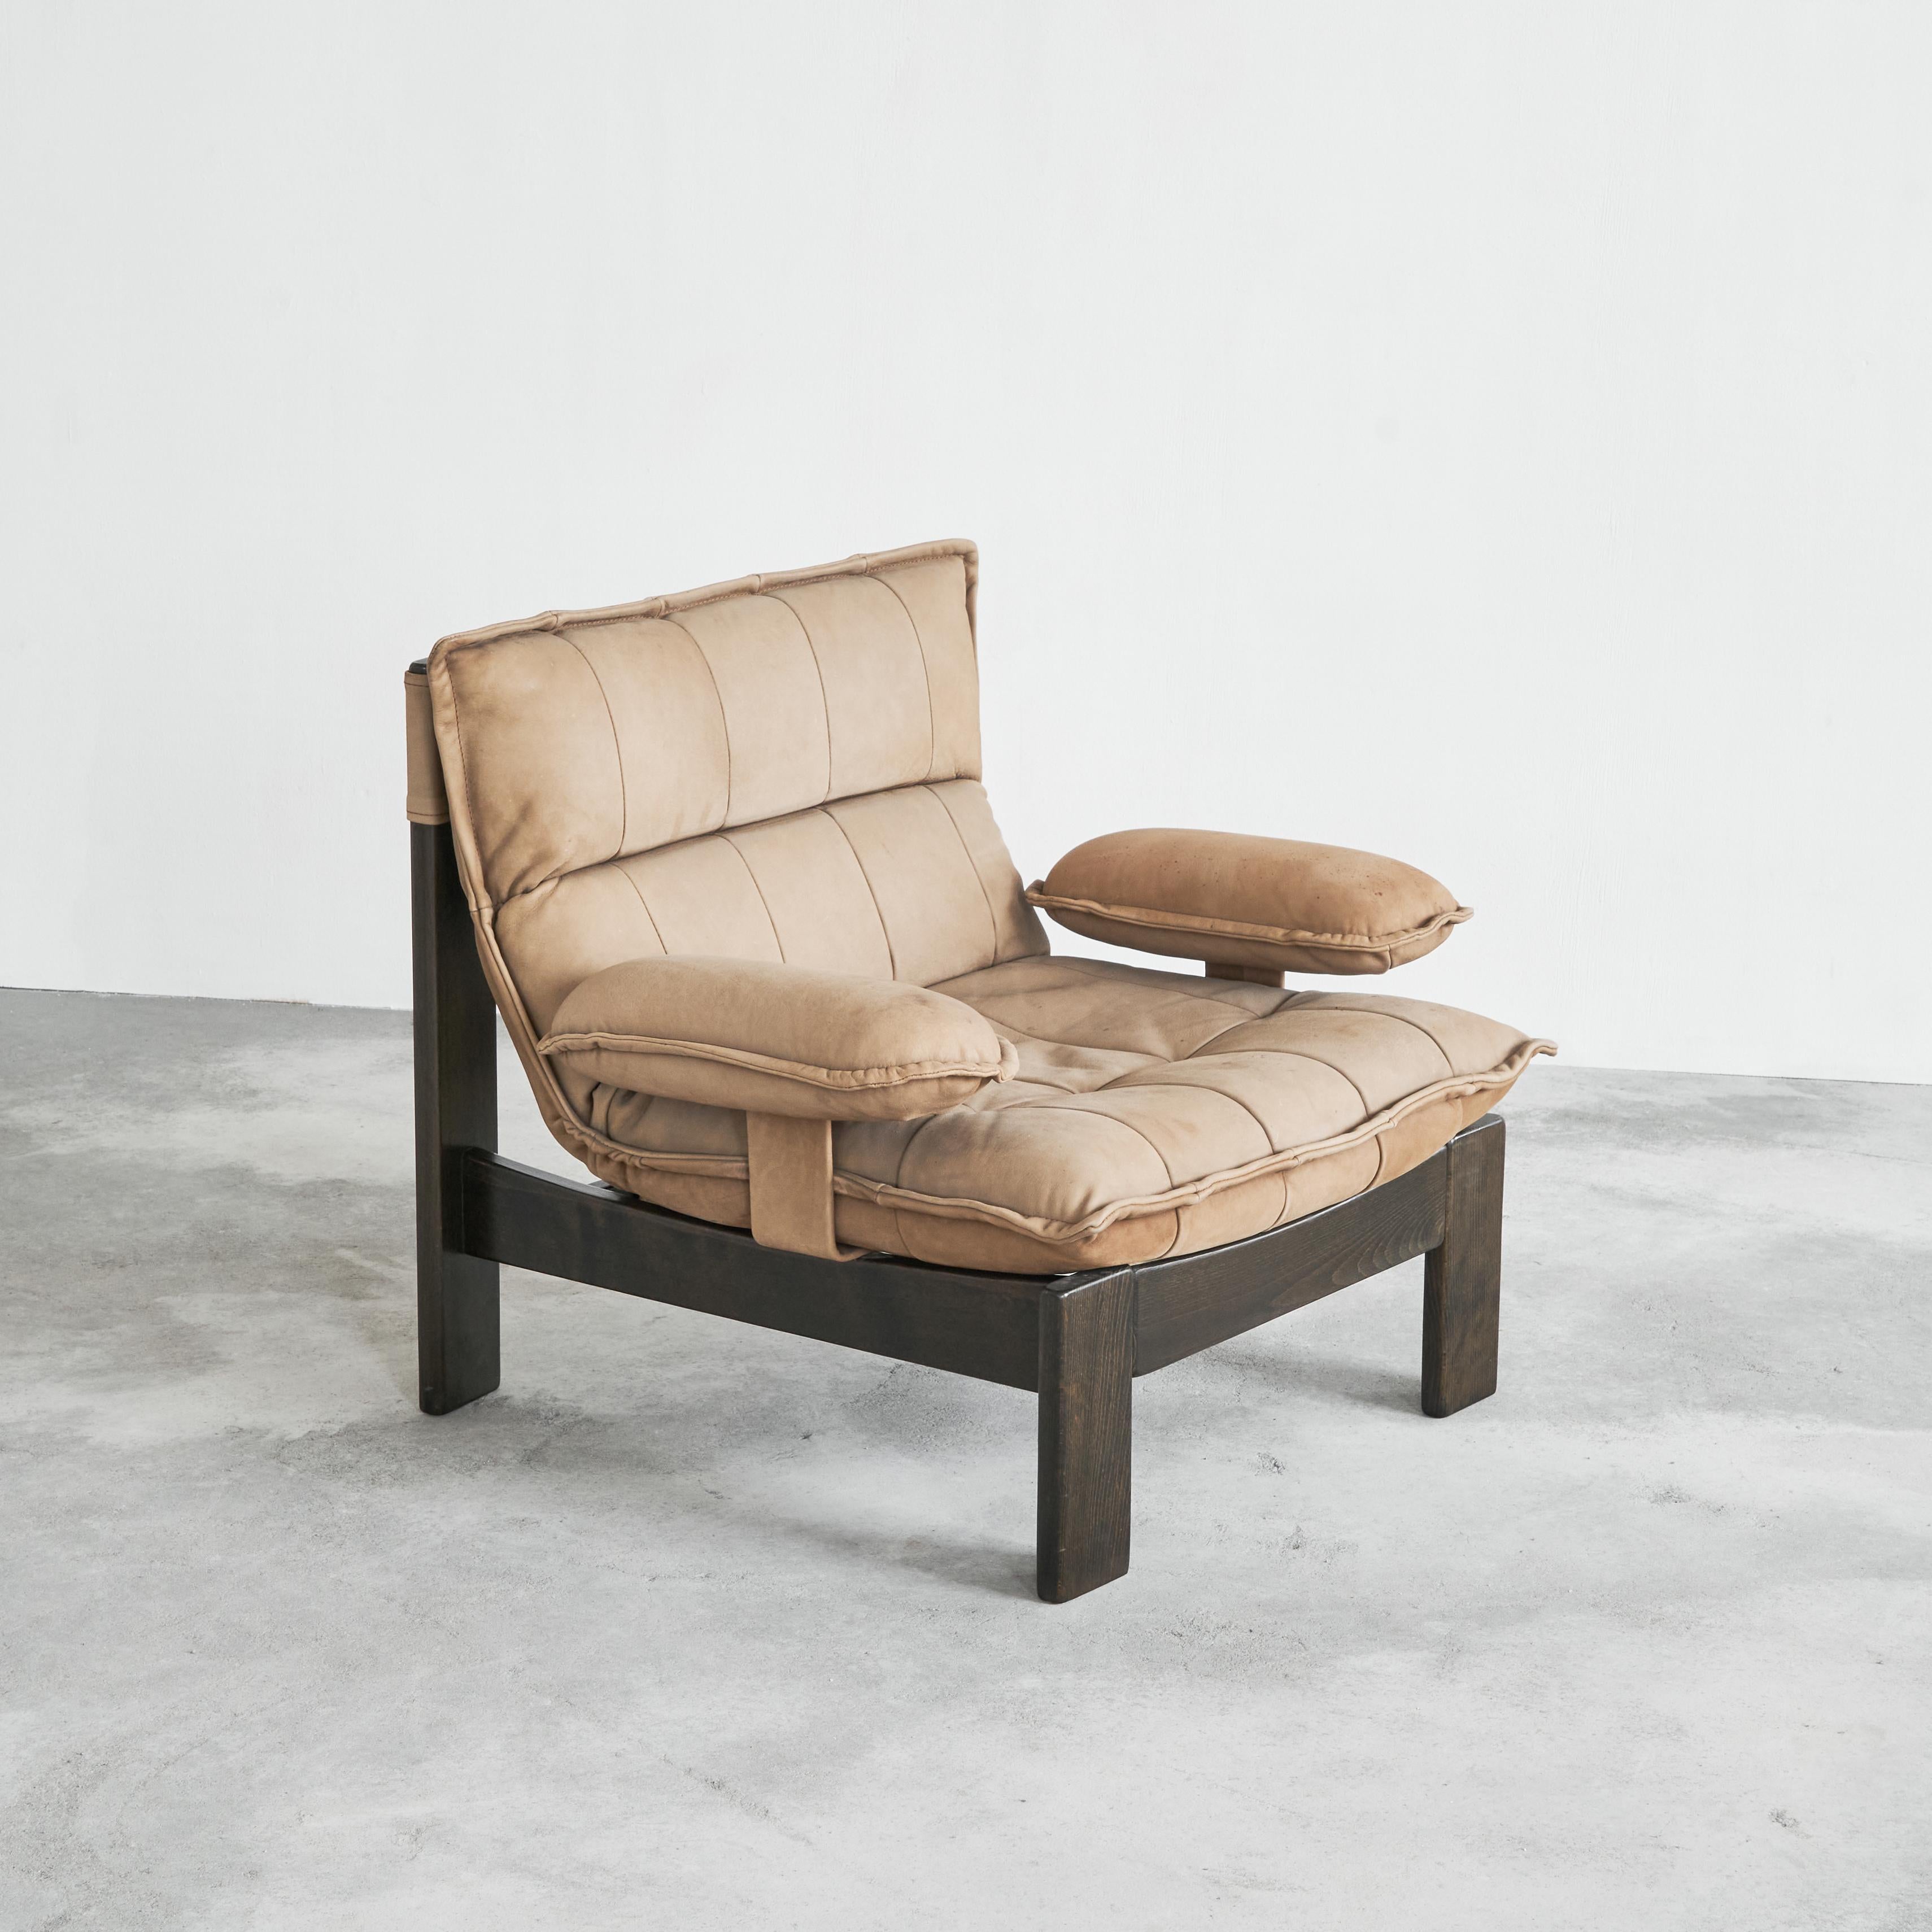 Mid-Century Modern Lounge Chair in Camel Colored Suede and Stained Oak, 1970s